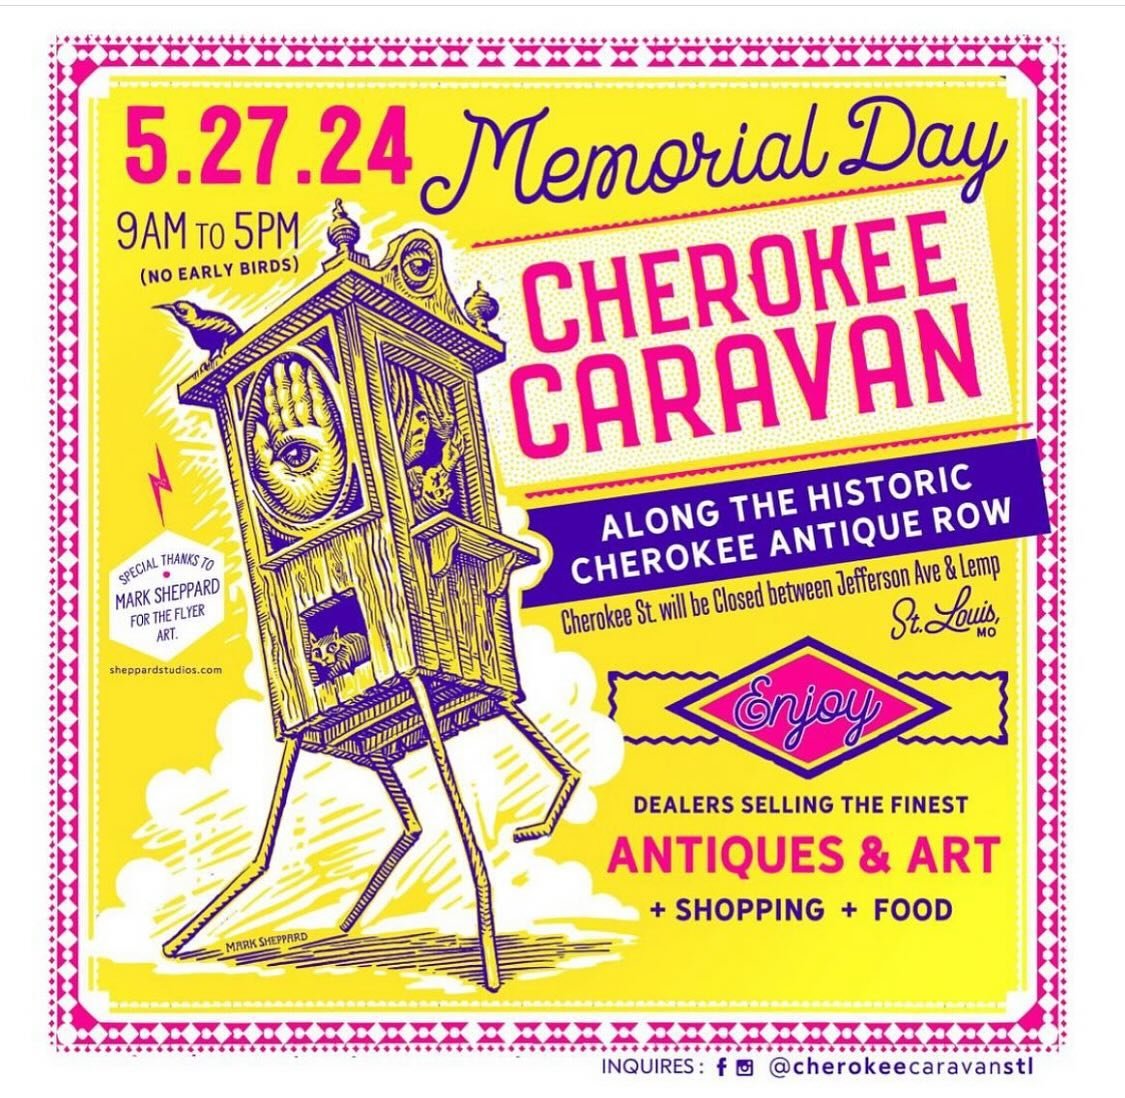 Don&rsquo;t miss out on this magical street fair just a hop skip and a jump from your house!!! Tons of antiques for sale, with food and drink all along the way on Cherokee street from lemp to Jefferson!